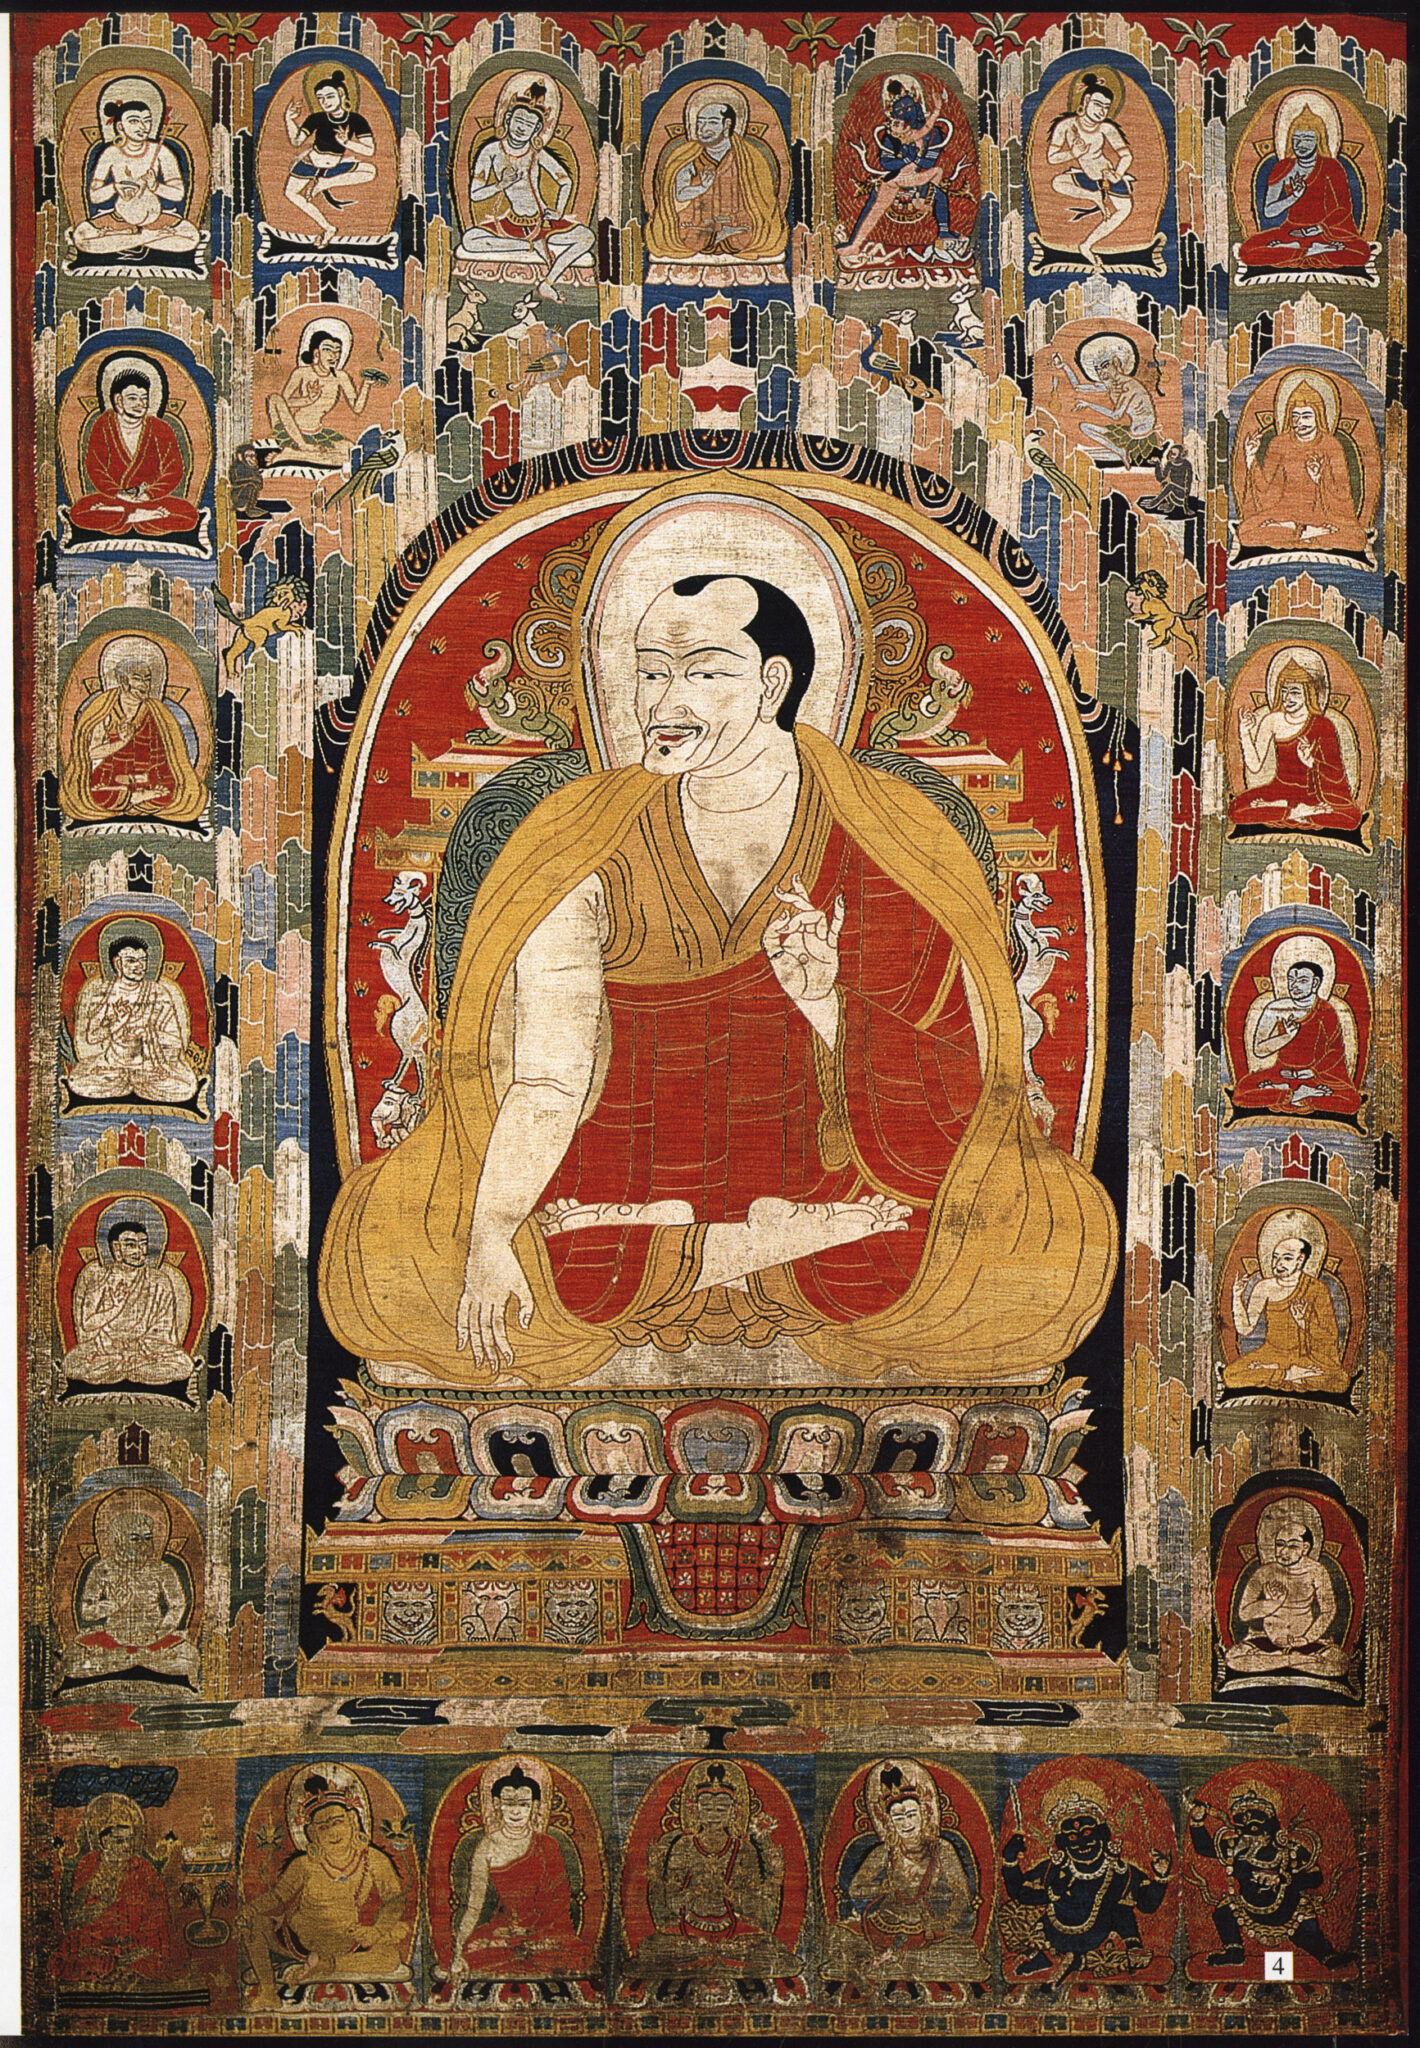 Monk wearing saffron and red robes, hands posed in mudras, seated on lotus pedestal surrounded by miniature portraits